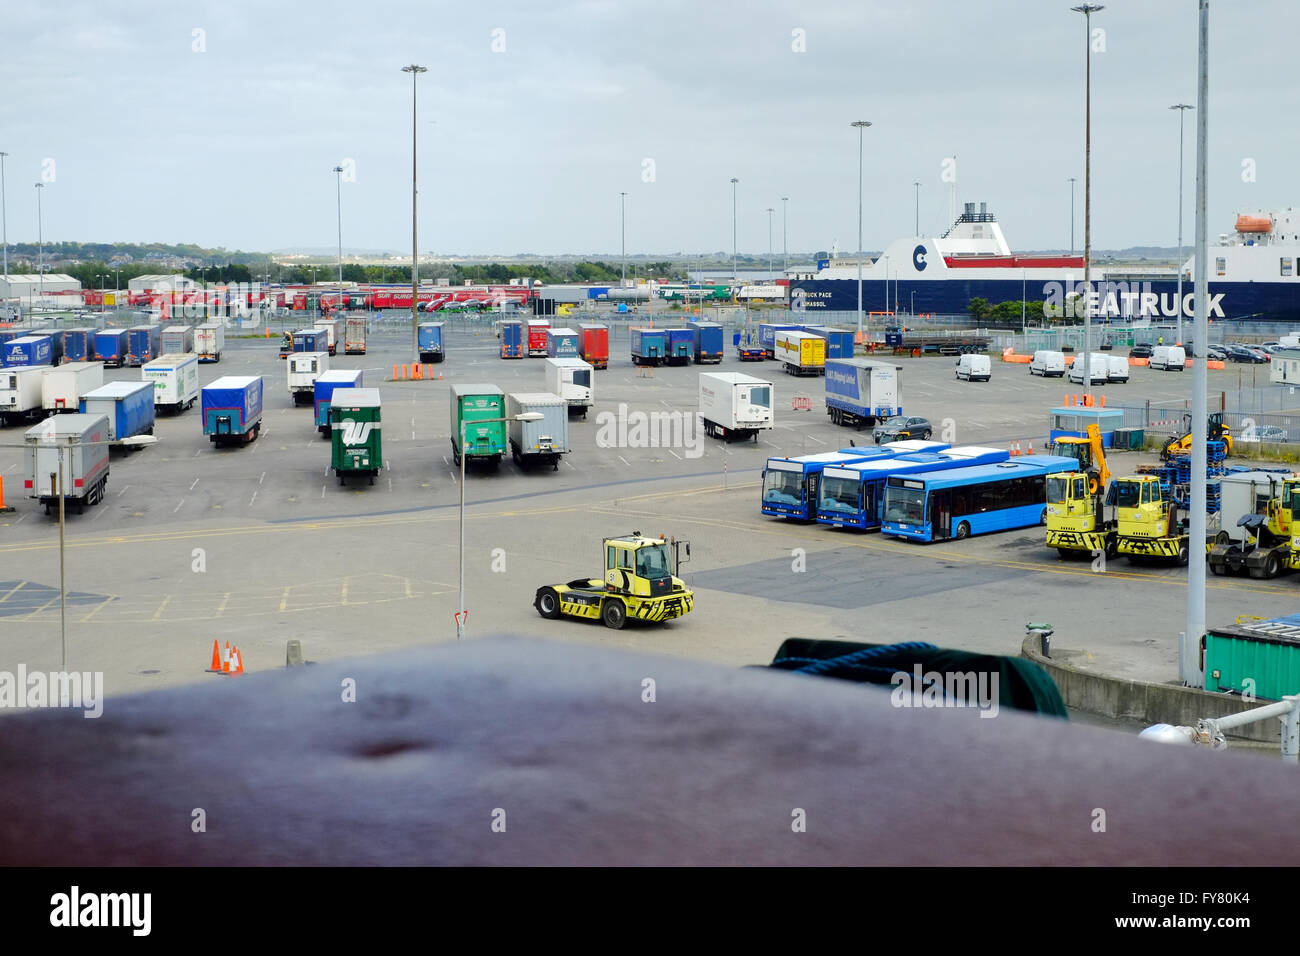 View from a ferry at Dublin Port, Ireland. Stock Photo